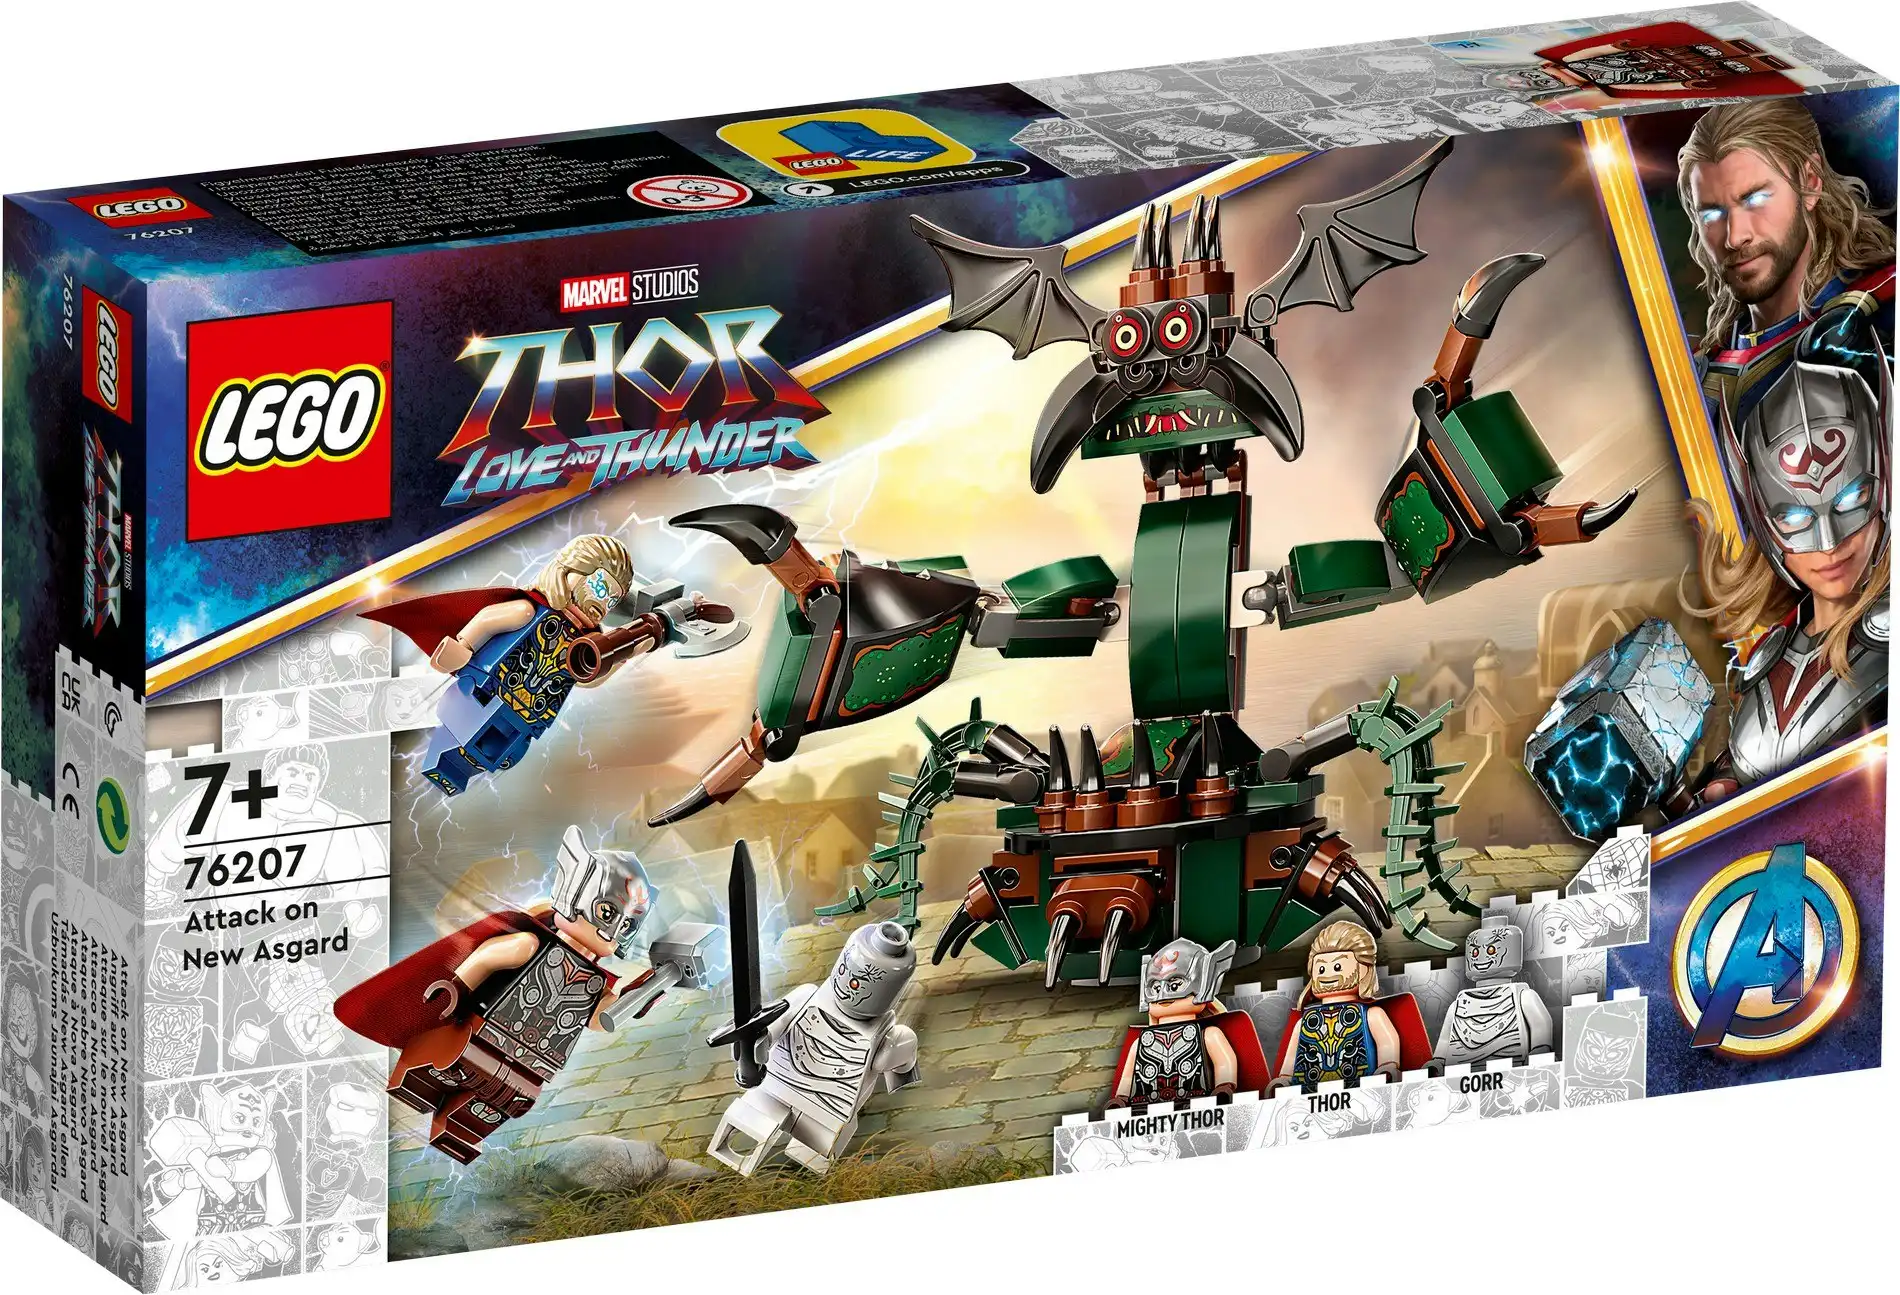 LEGO 76207 Attack on New Asgard - Marvel Super Heroes